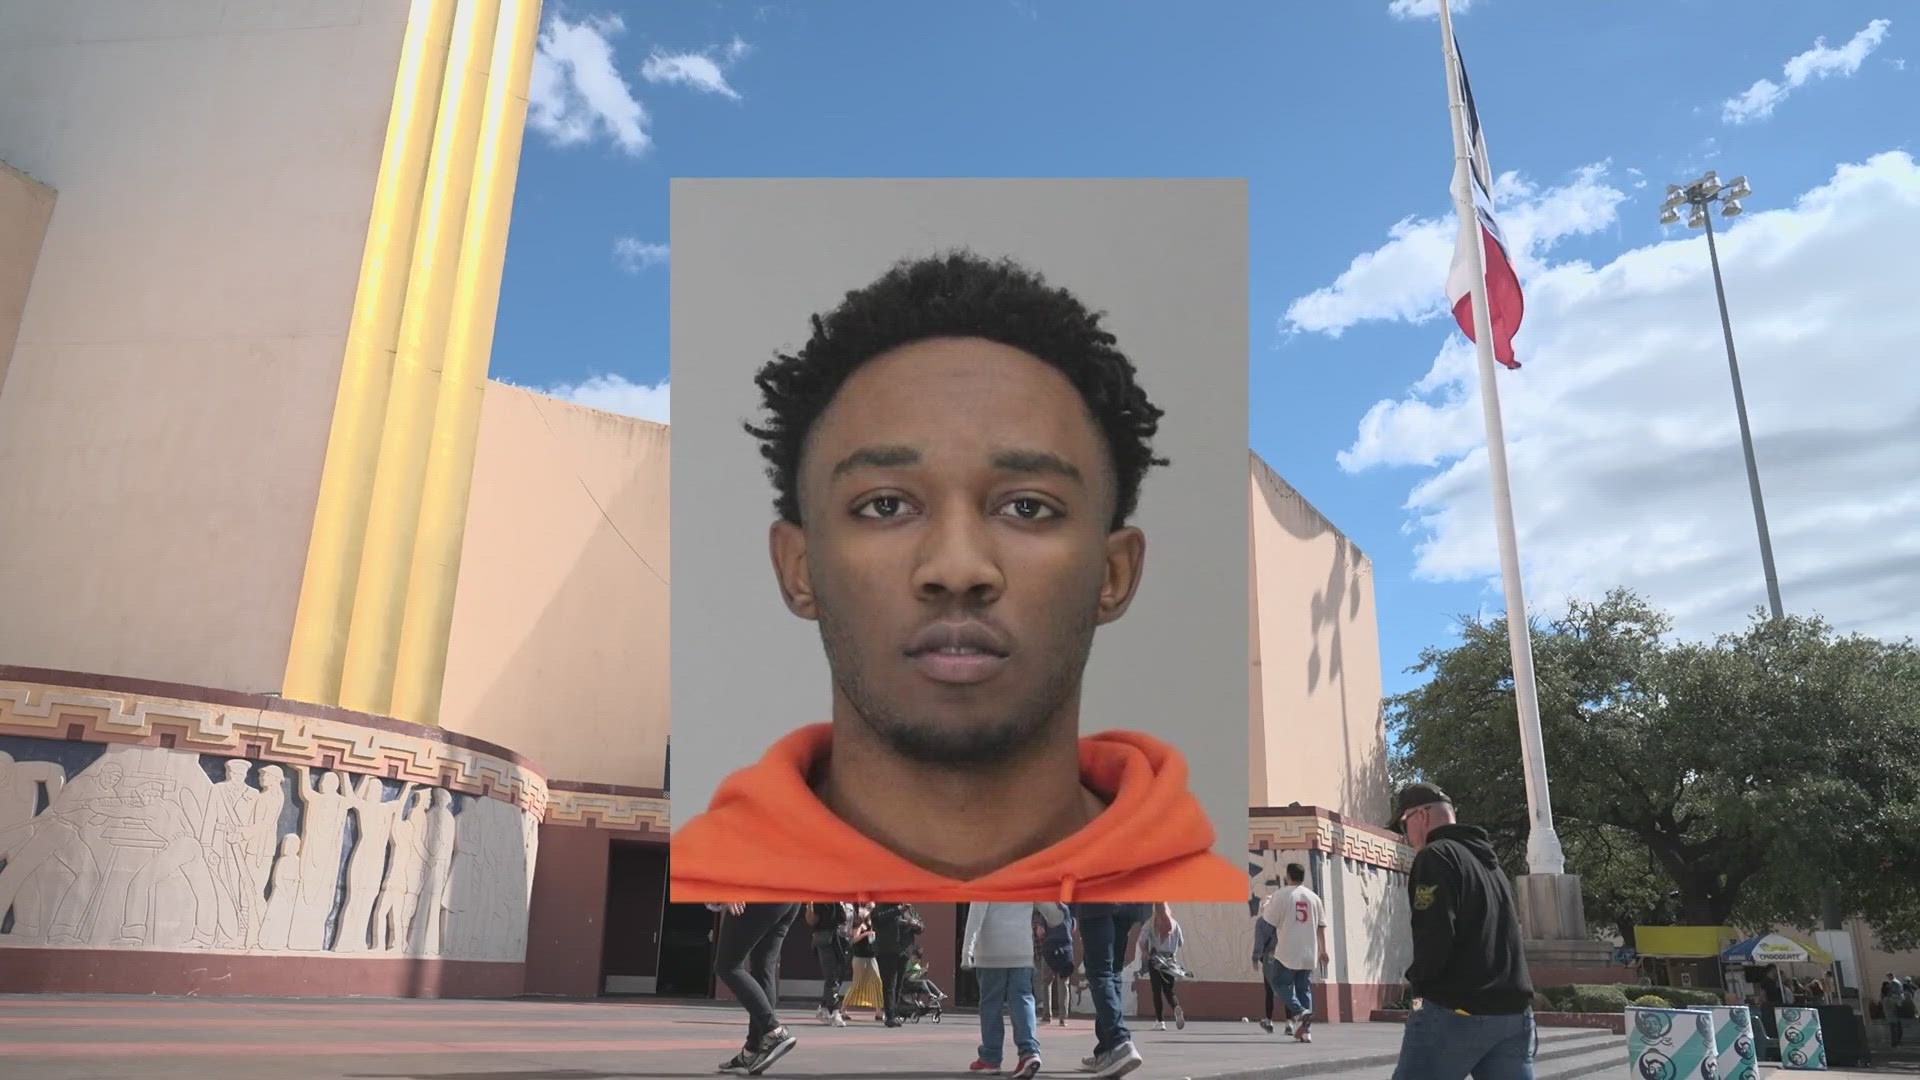 Cameron Turner faces three charges of aggravated assault with a deadly weapon and one unlawfully carrying a weapon charge, records show.